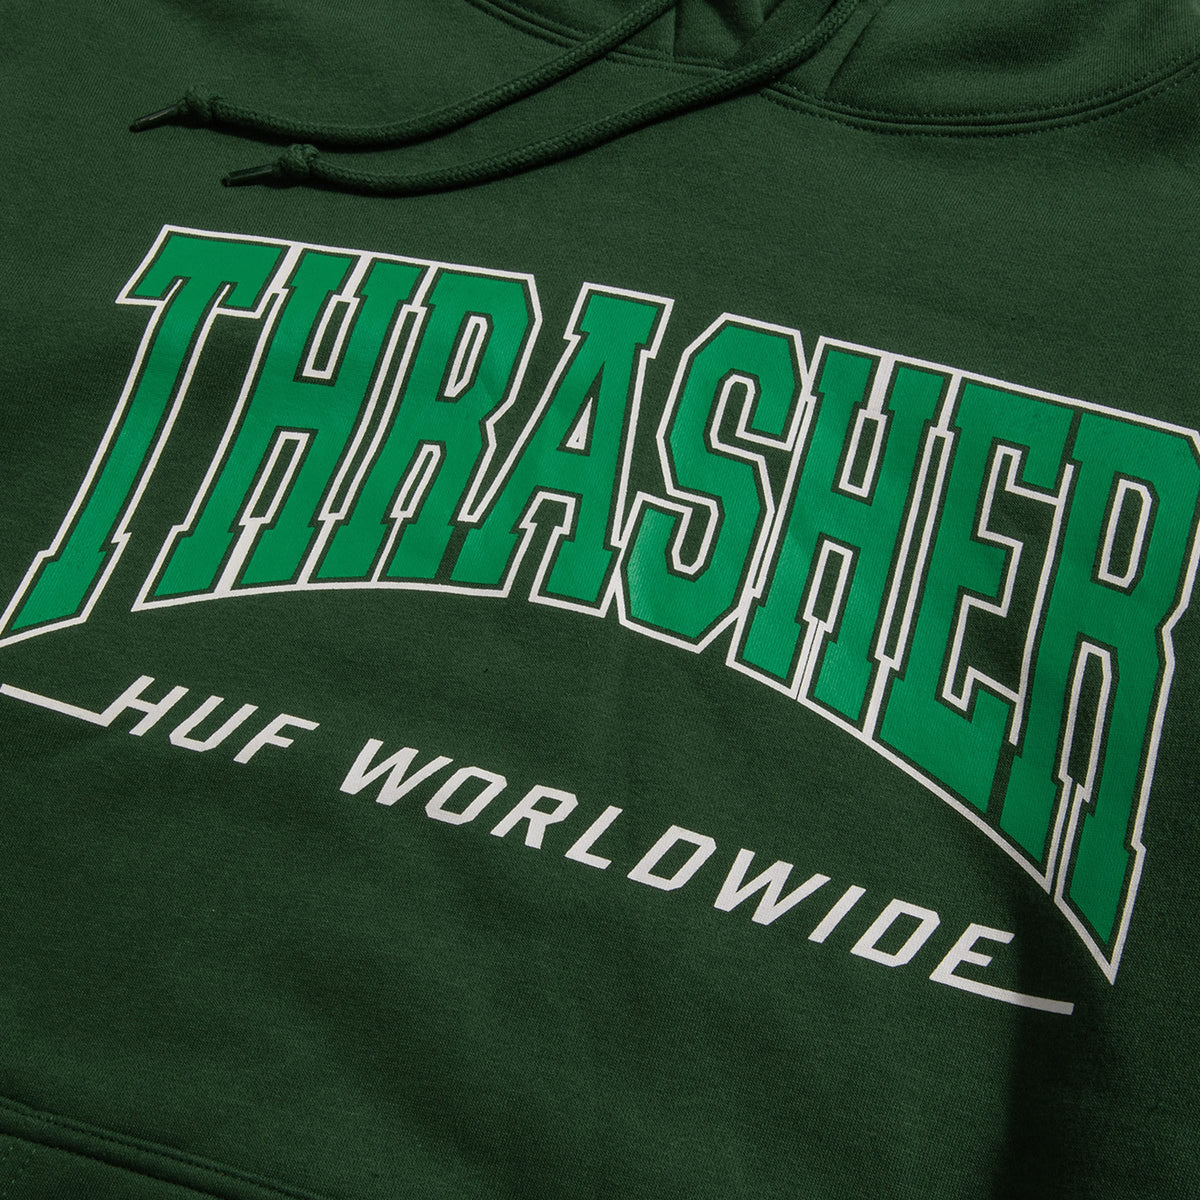 HUF x Thrasher Bayview Pullover Hoodie - Forest Green